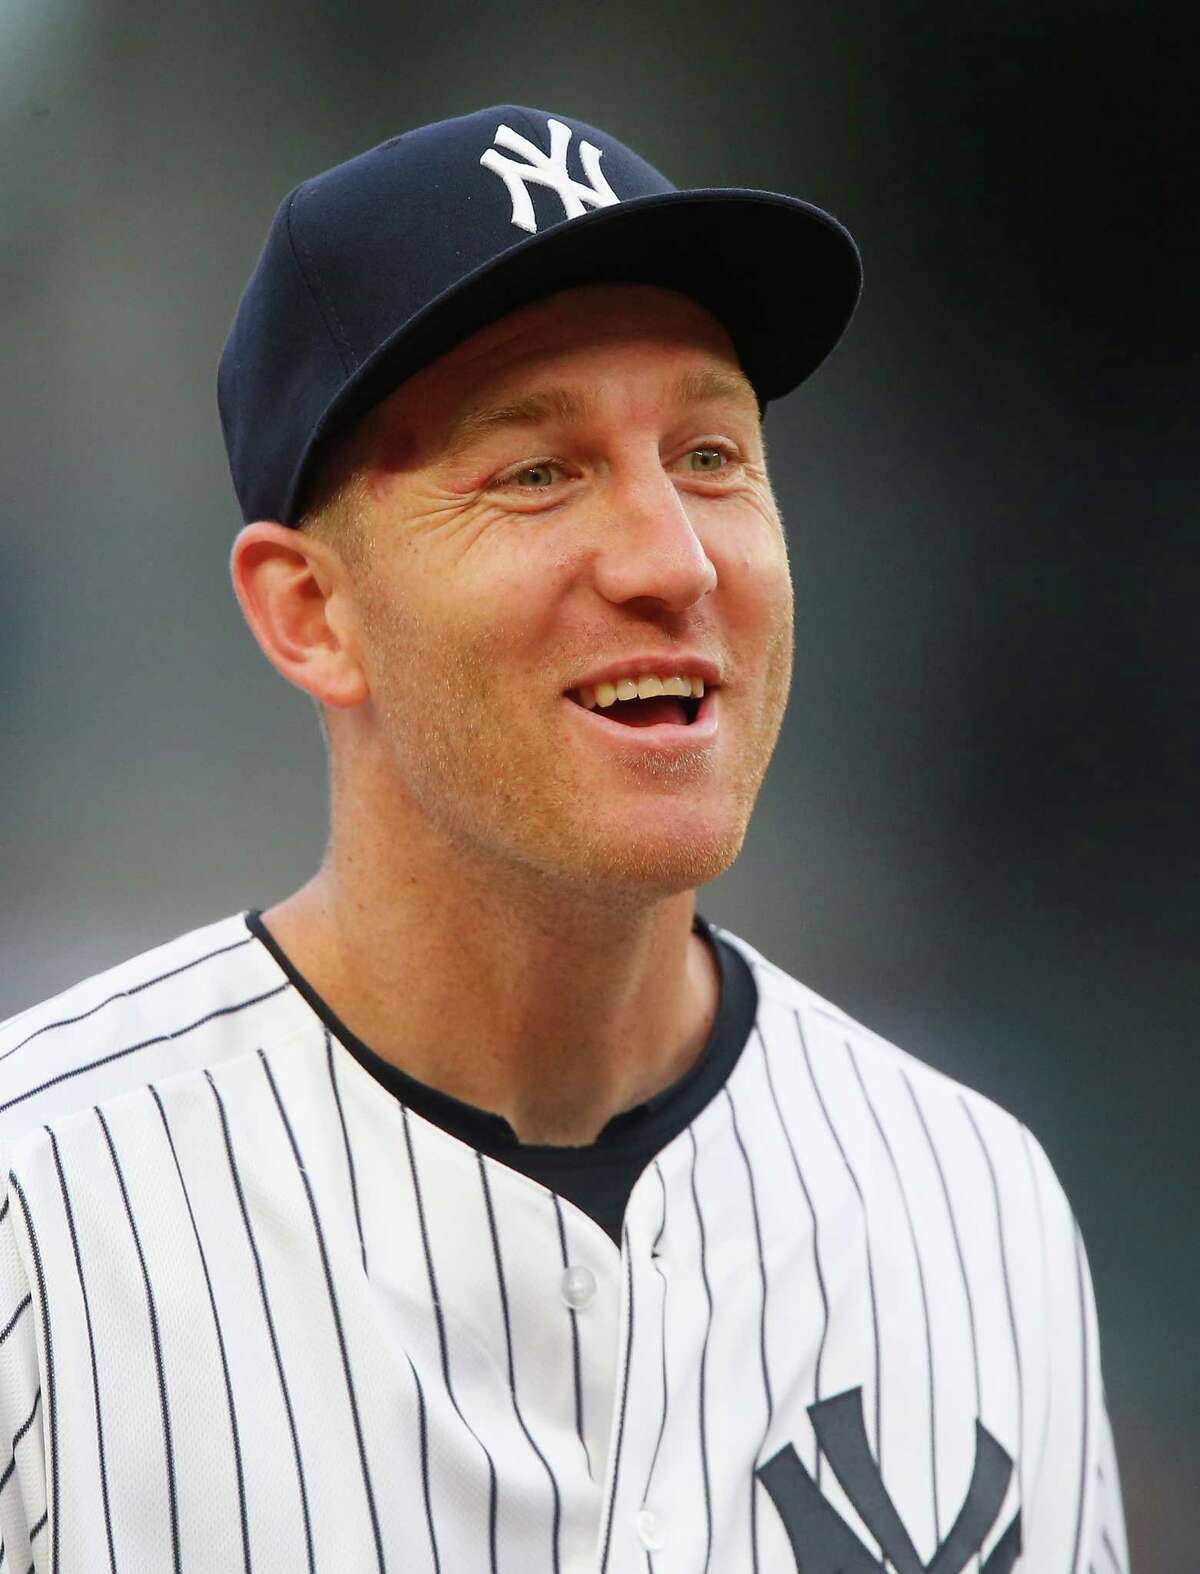 NEW YORK, NY - JULY 25: Todd Frazier #29 of the New York Yankees looks on before a game against the Cincinnati Reds at Yankee Stadium on July 25, 2017 in the Bronx borough of New York City. (Photo by Jim McIsaac/Getty Images) ORG XMIT: 700011746